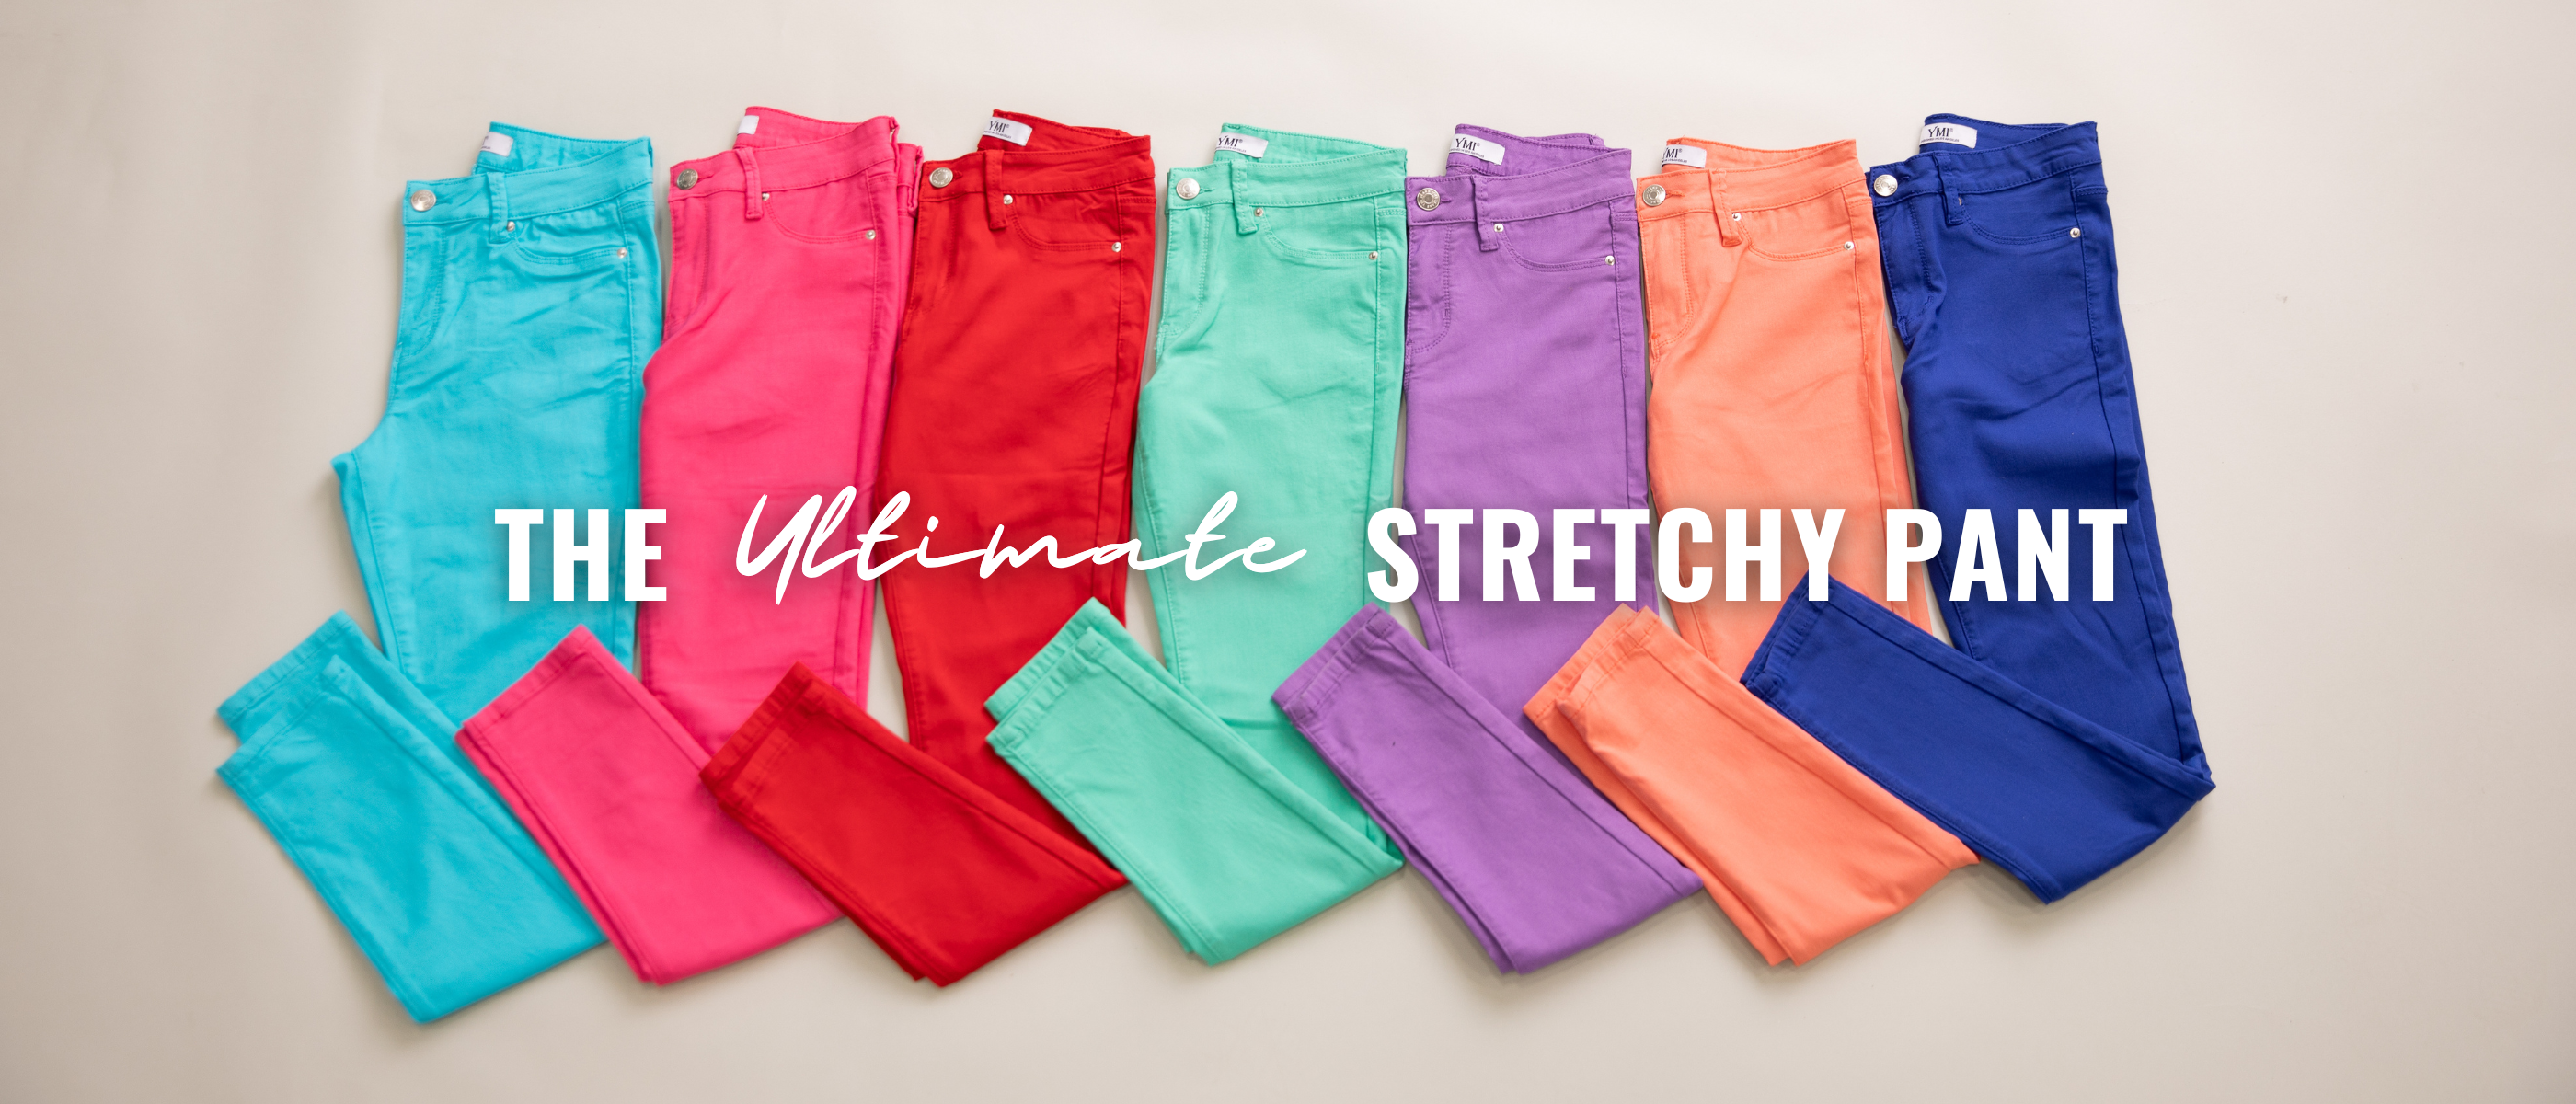 YMI Stretchy Pants Banner labeled with the Ultimate Stretchy pant